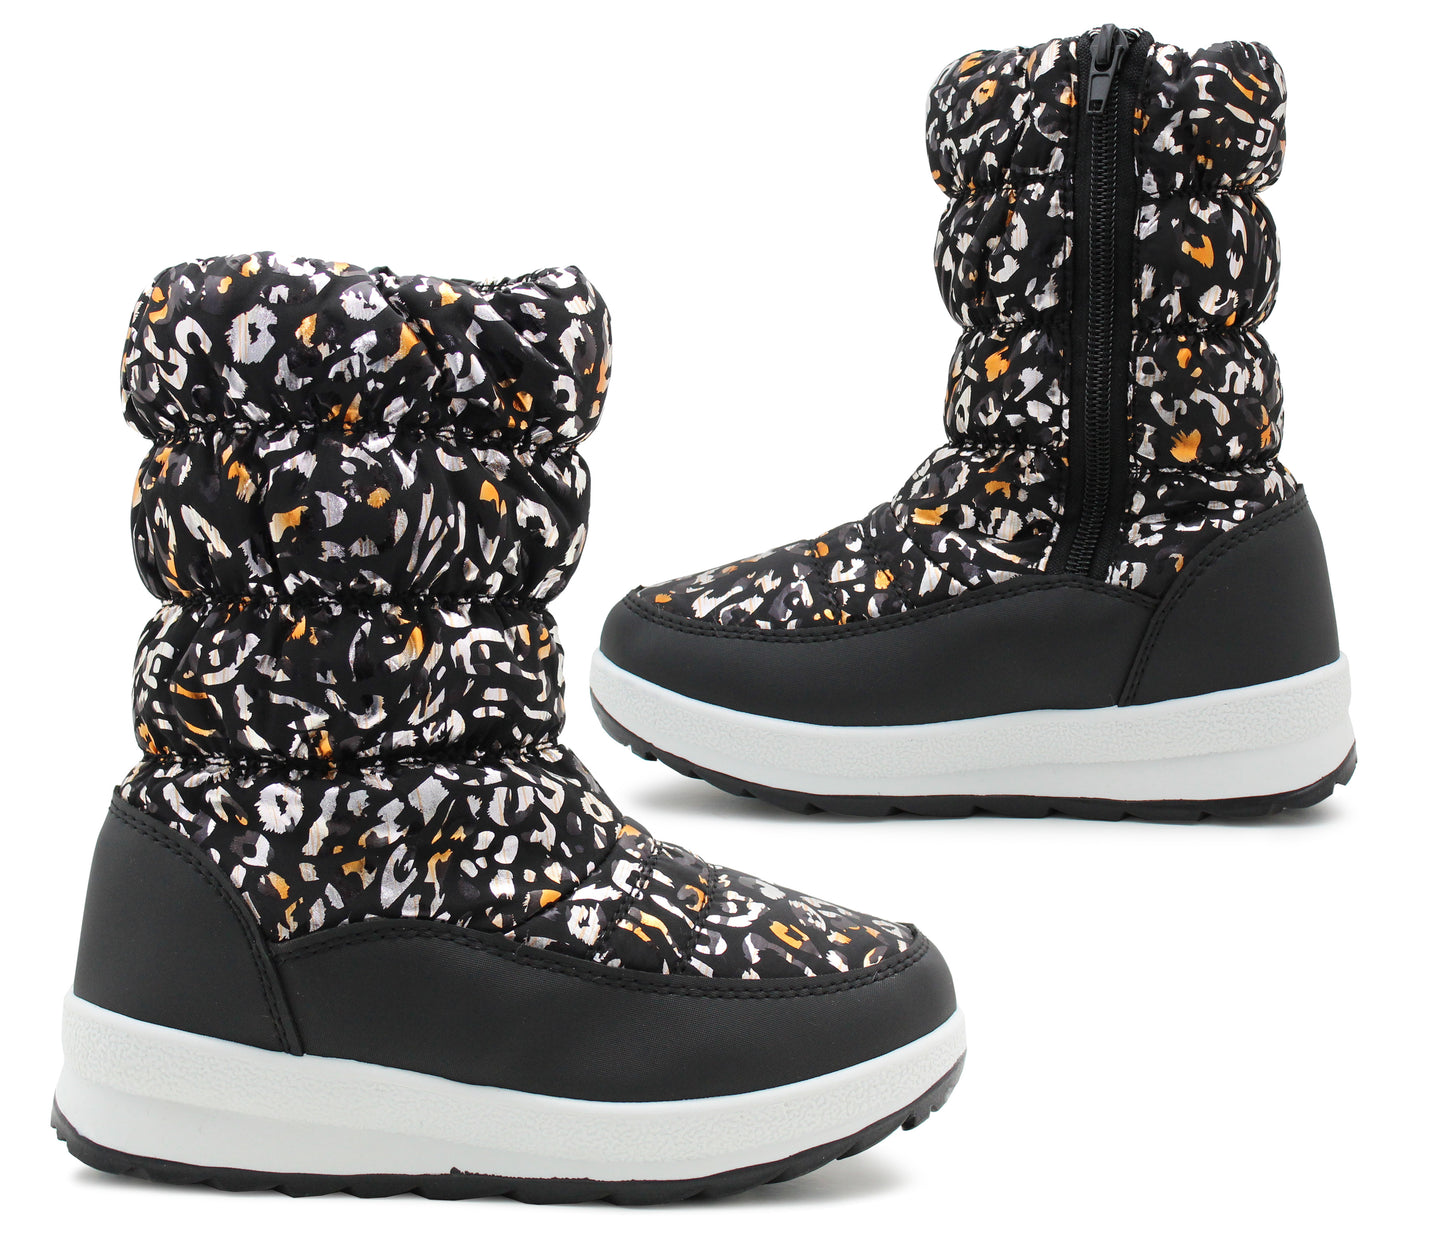 Girls Black Leopard Winter Snow Boots Kids Thermal Quilted Faux Fur Lined Zip Up Mid Calf Ankle Booties